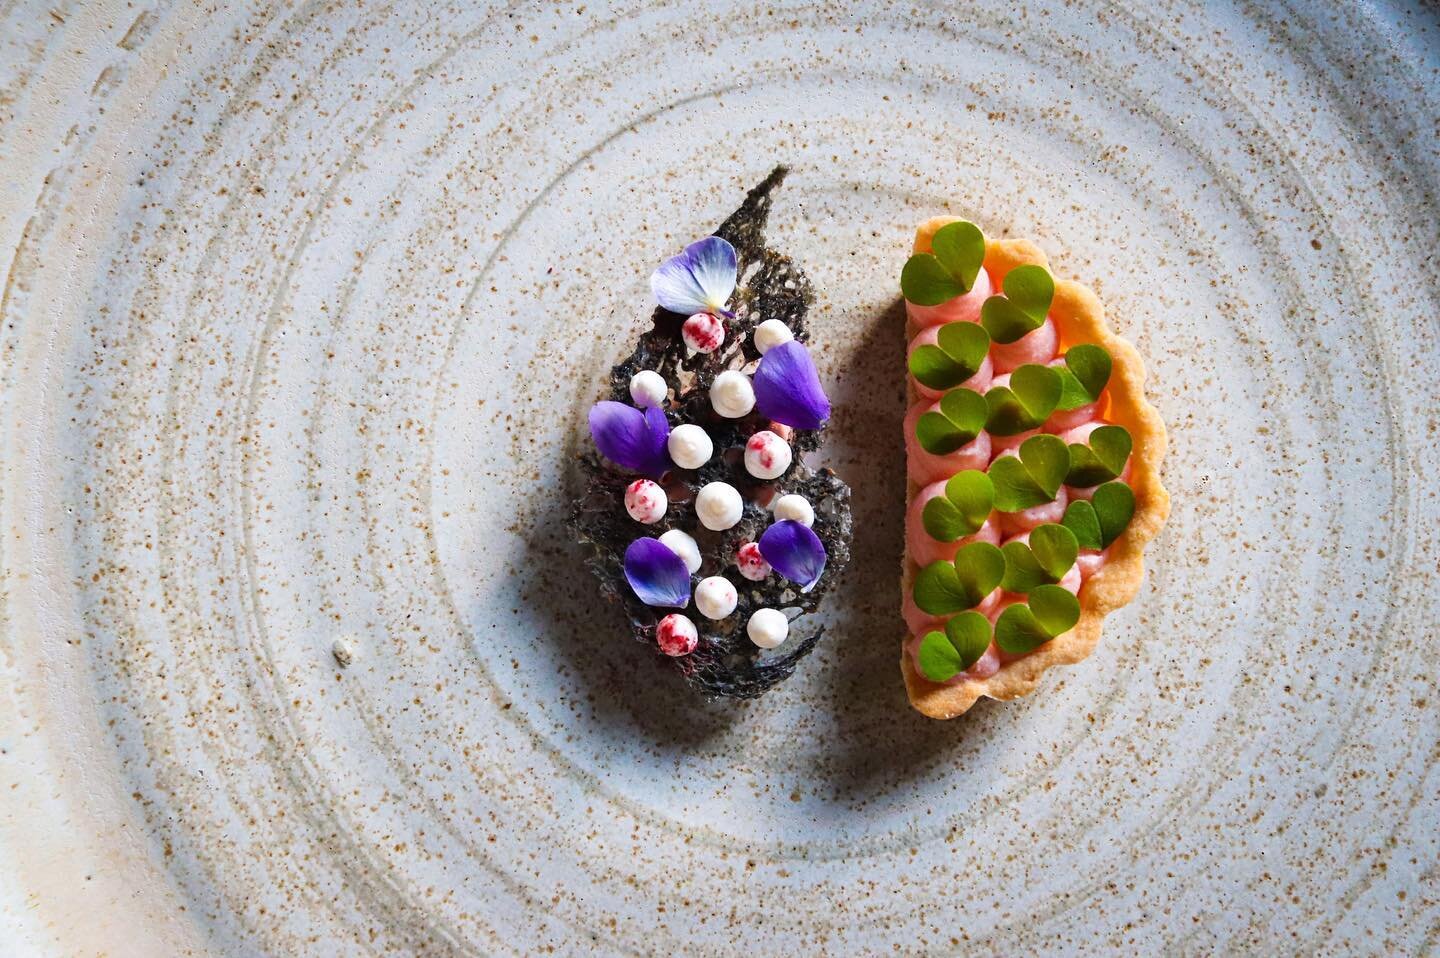 This is a dish to have fun with and play with&hellip; and eat as you like! Use the sourdough to dip, or grab a fork, it&rsquo;s all designed to just enjoy. Simple. Smoked trout tartlet&hellip; 
Smoked trout and apple tartlet, Charcoal sourdough, smok